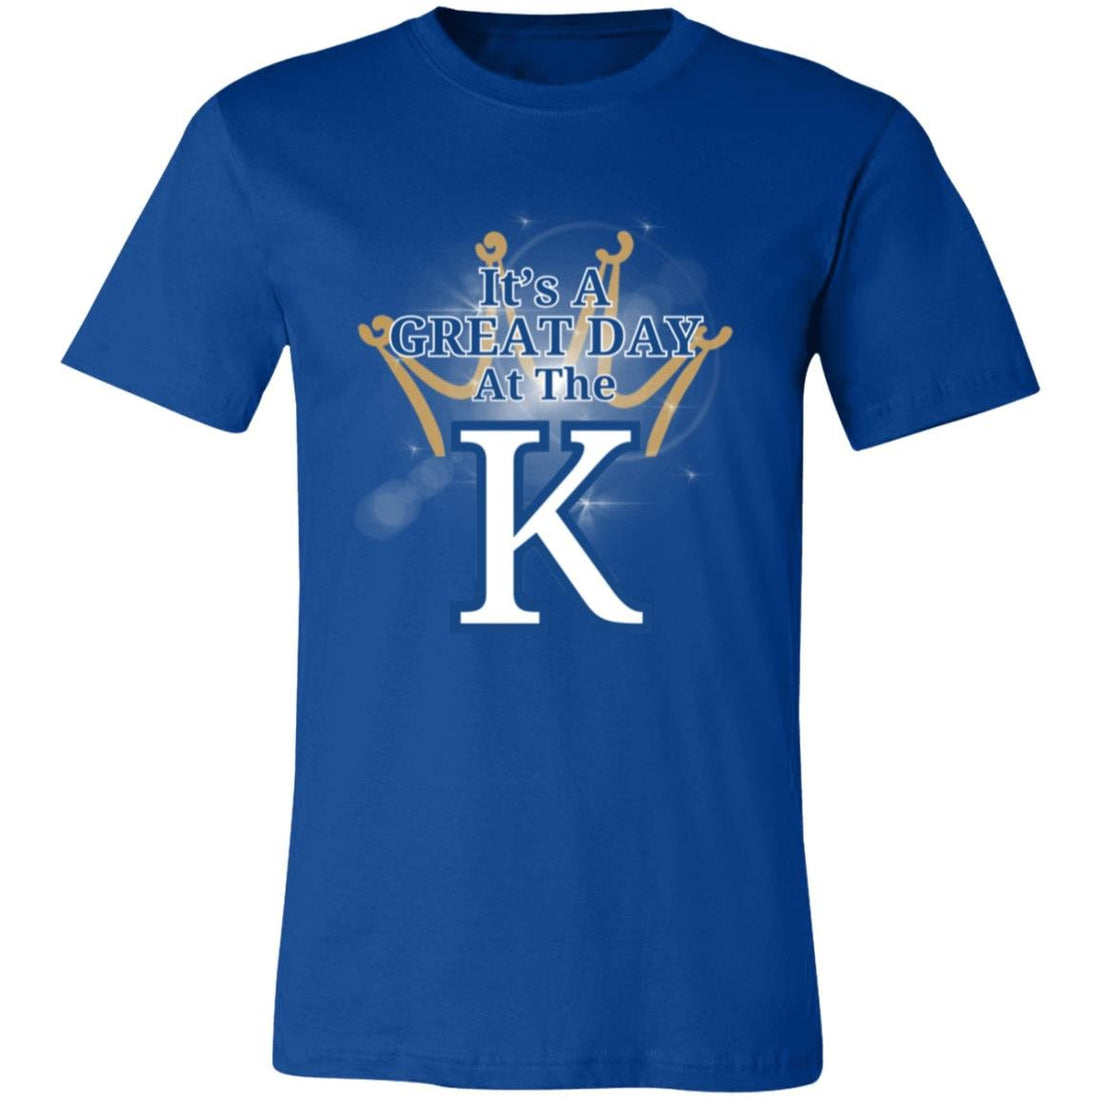 Great Day @ K T-Shirt - T-Shirts - Positively Sassy - Great Day @ K T-Shirt